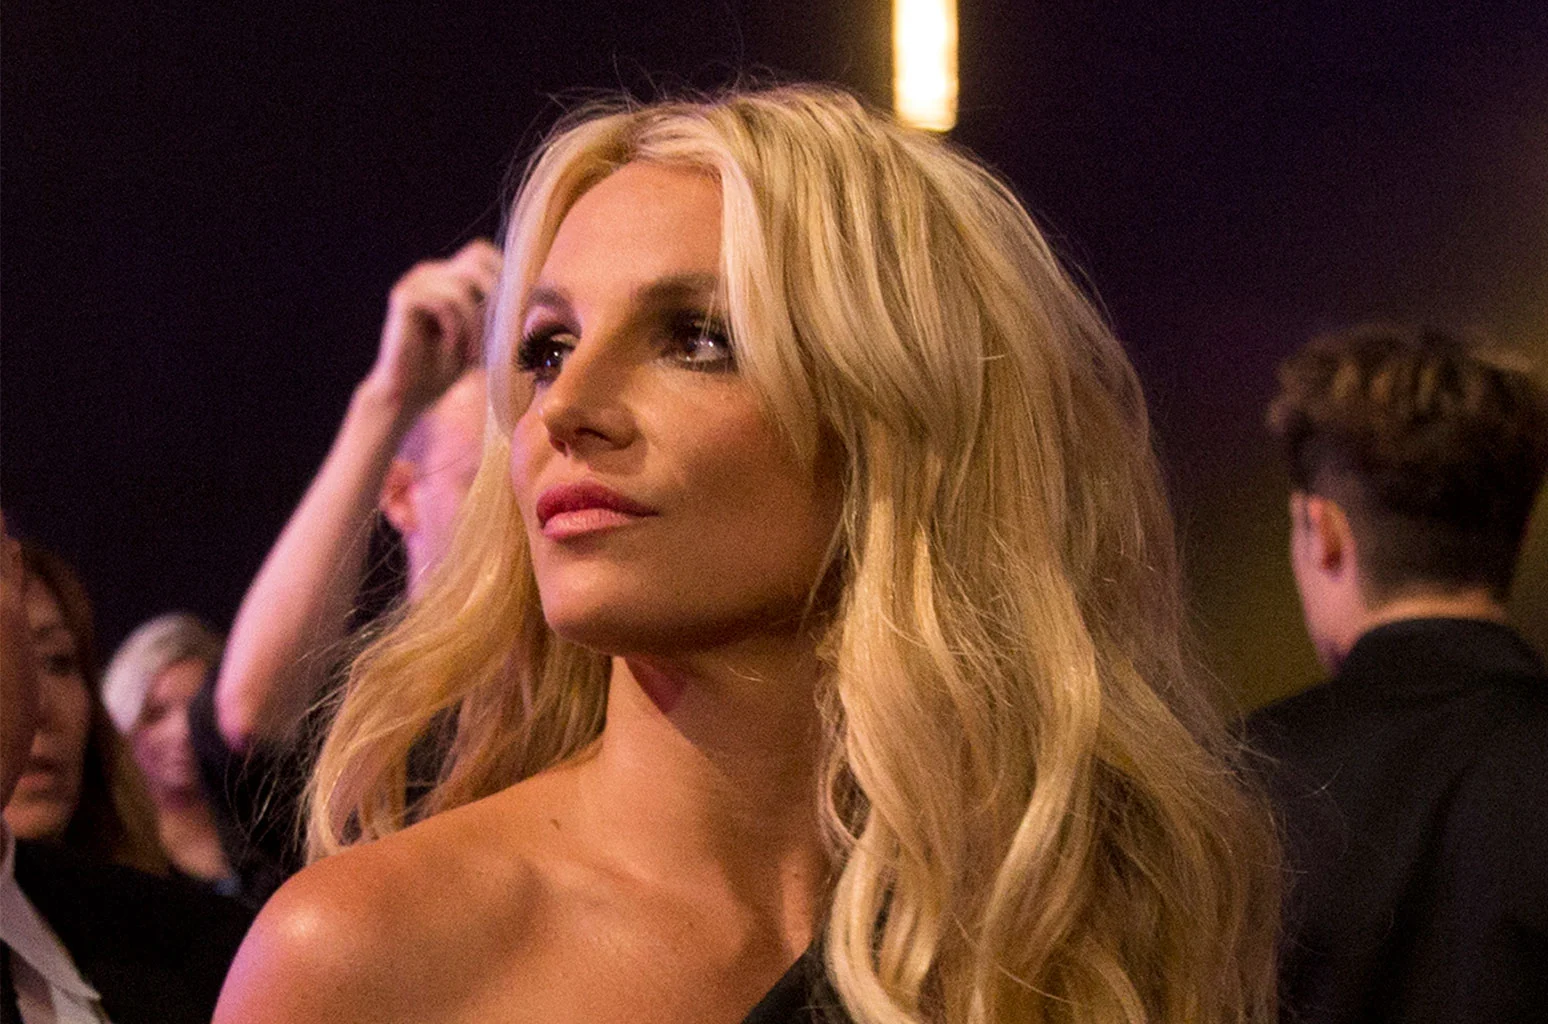 Britney Spears was extorted by father Jamie Spears for money to leave his role as conservator